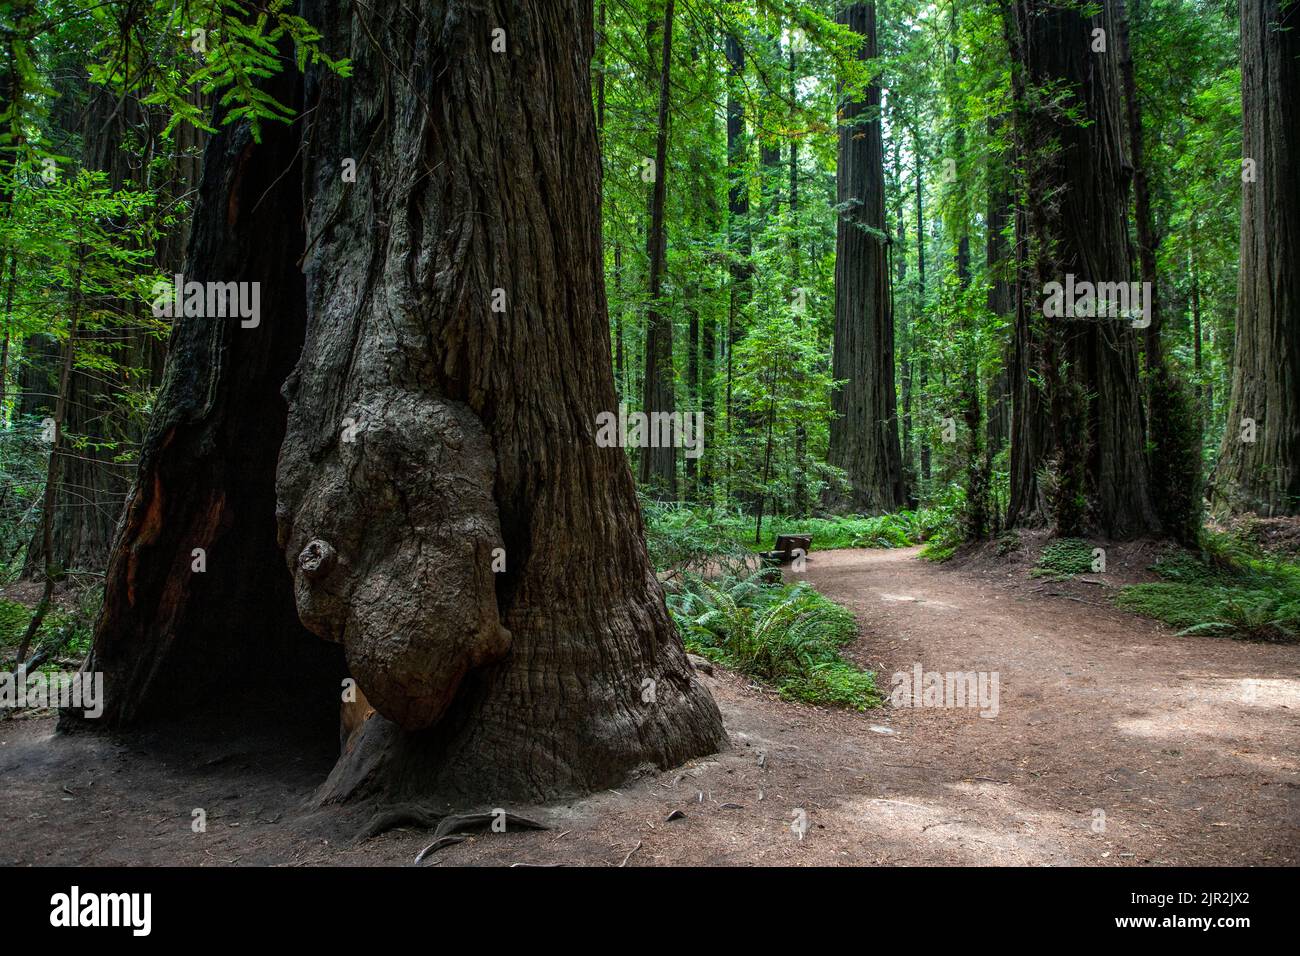 There is a vast forest of redwood trees in Northern California in Humboldt County. Stock Photo